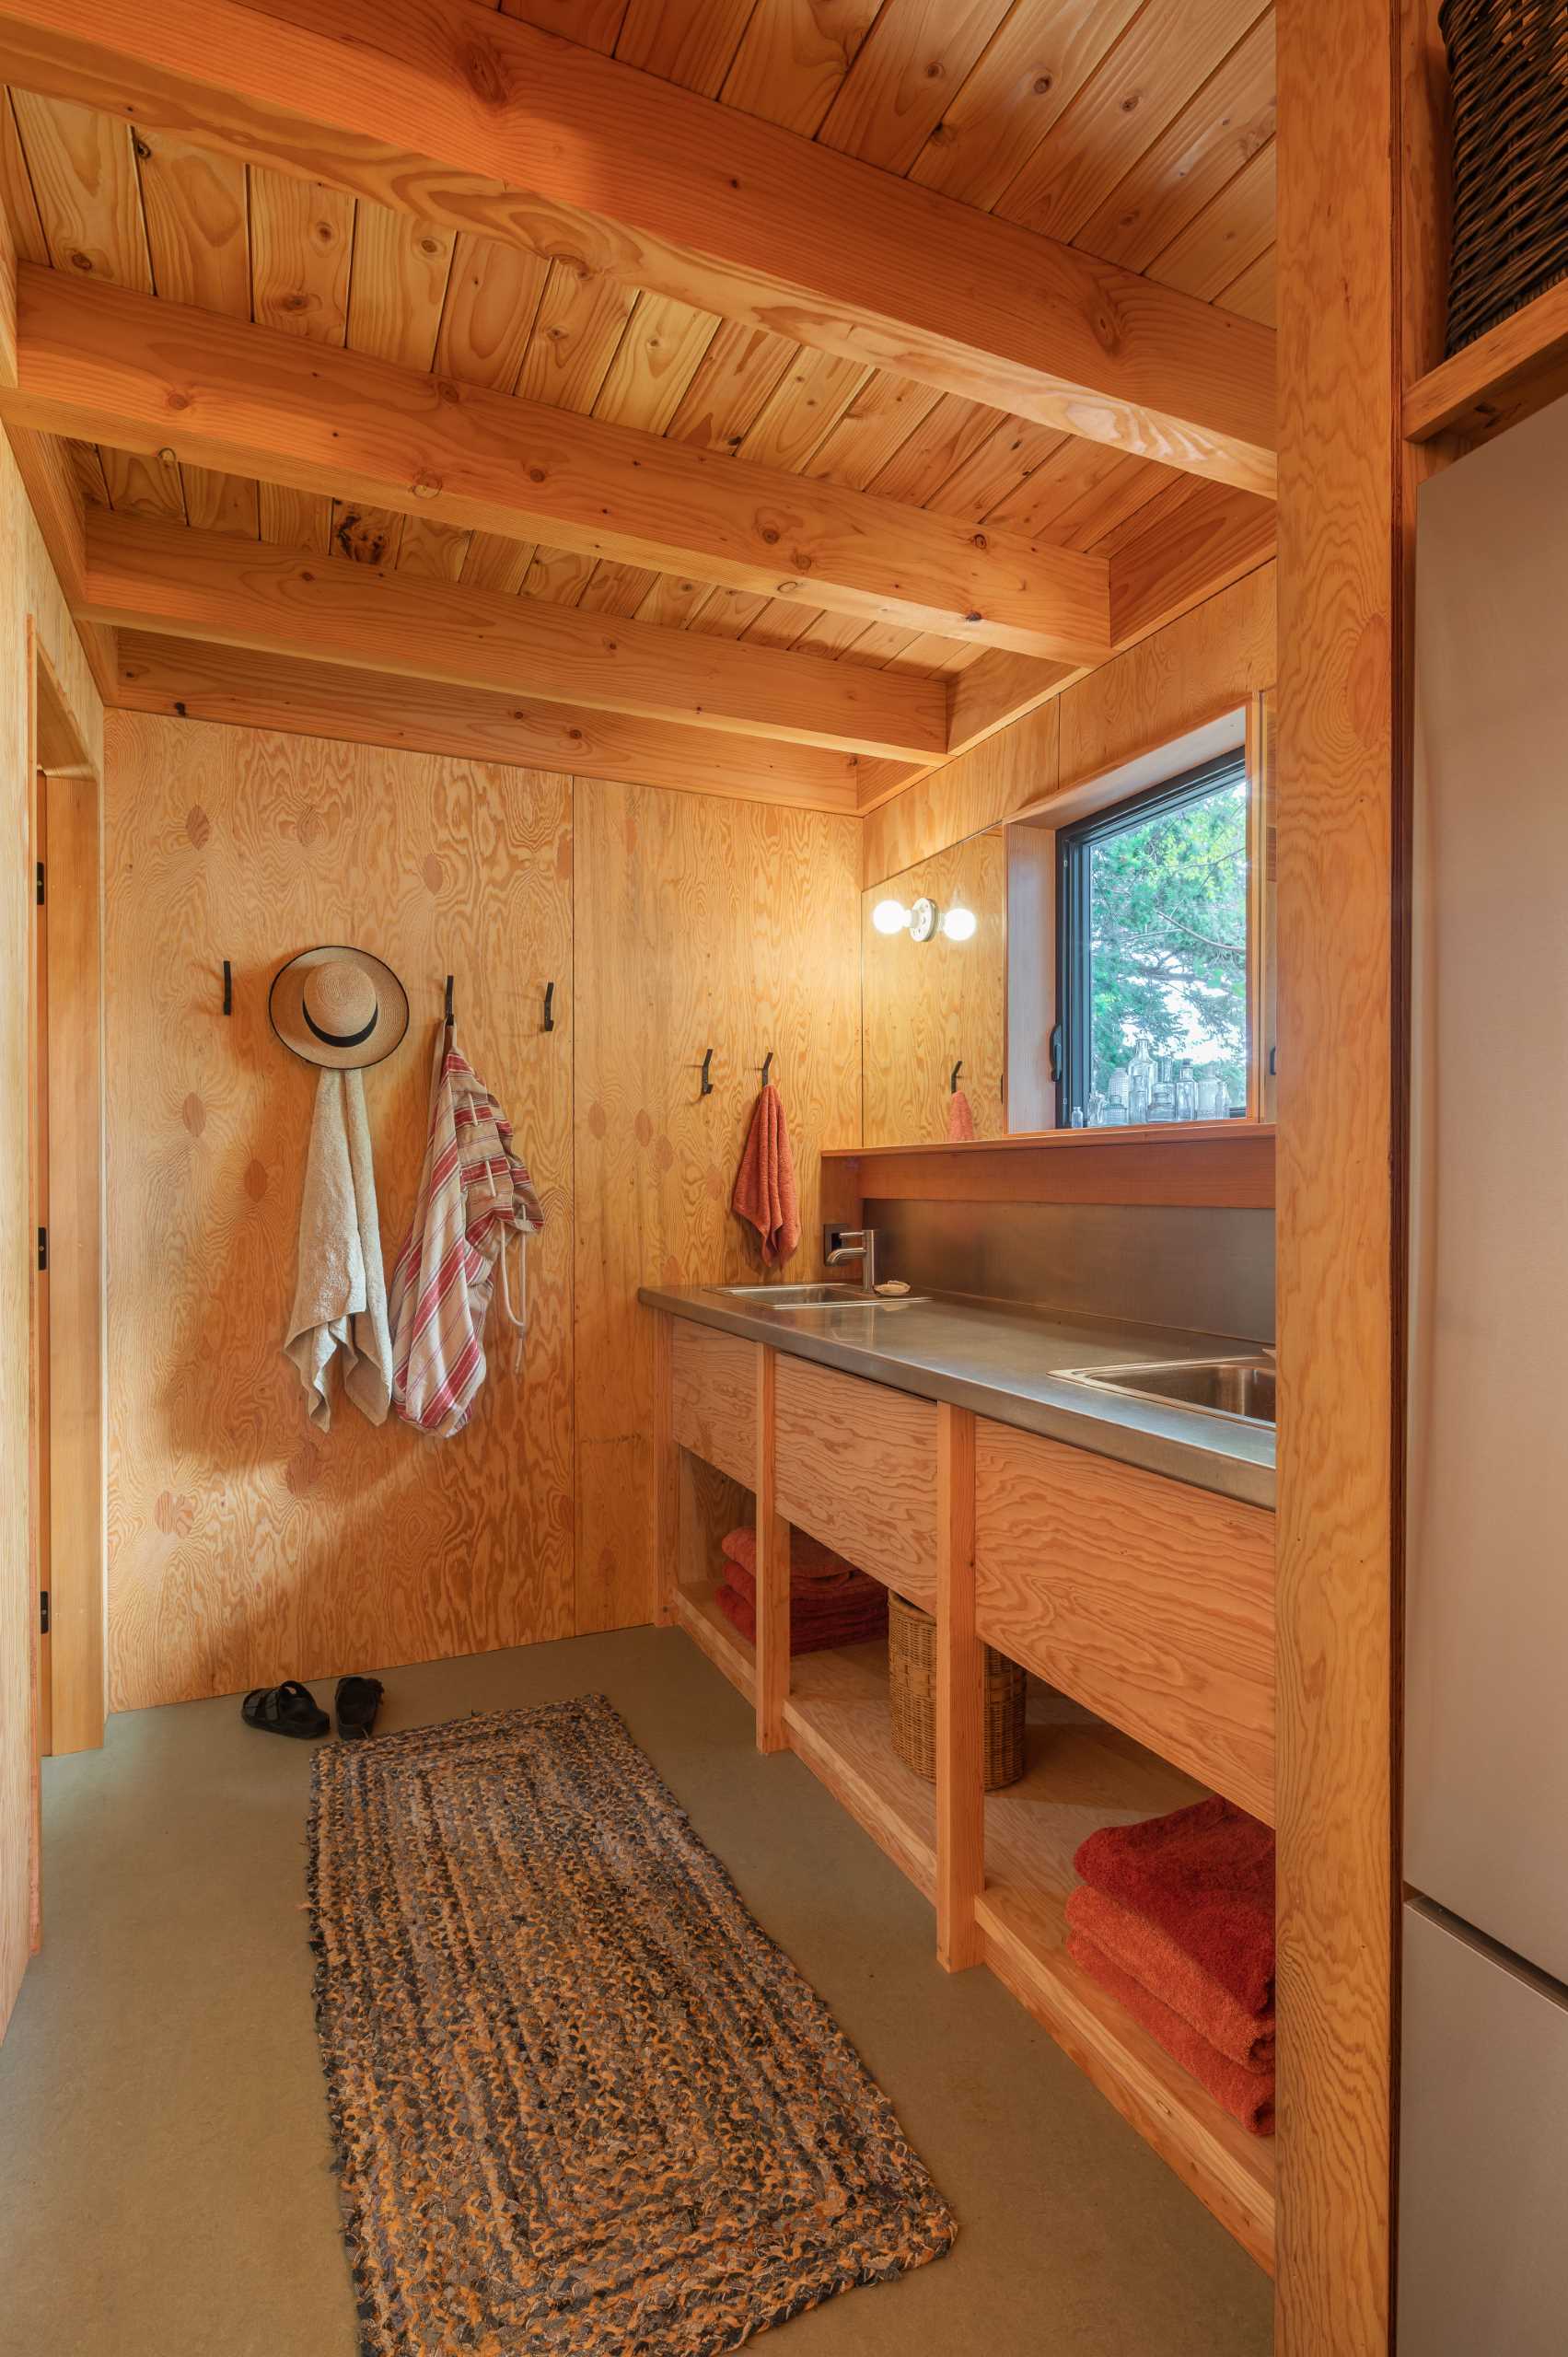 In the bathroom area of this cabin, there's a custom stainless steel counter with matching sinks, polished chrome faucets, and mirrors positioned on either side of the window.